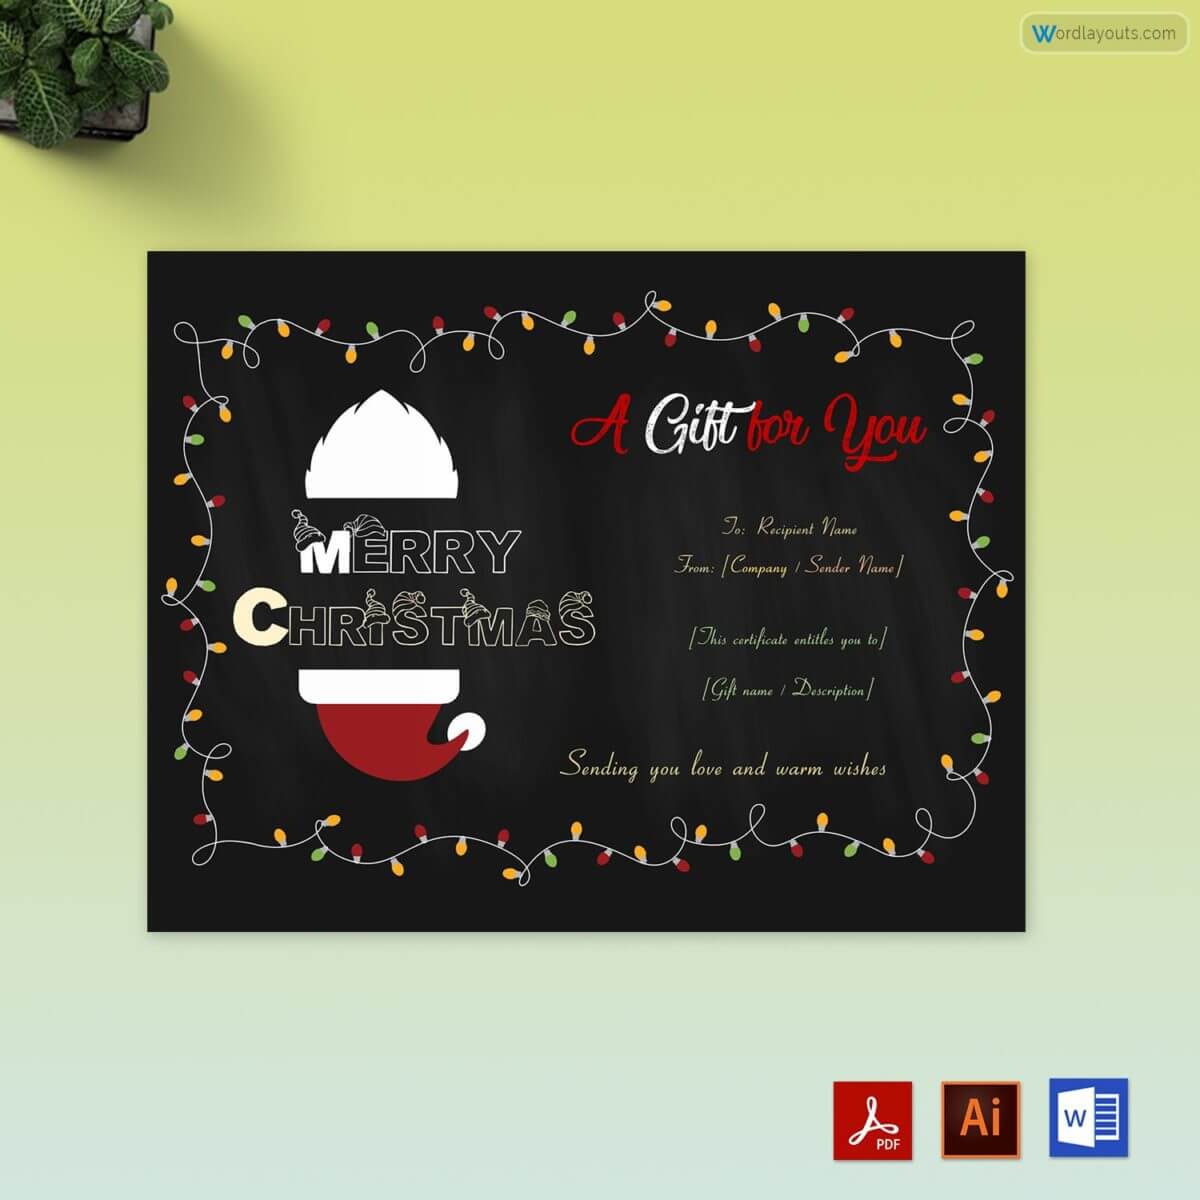 Free Downloadable Christmas Gift Certificate Template 07 for Word, Adobe and AI Format